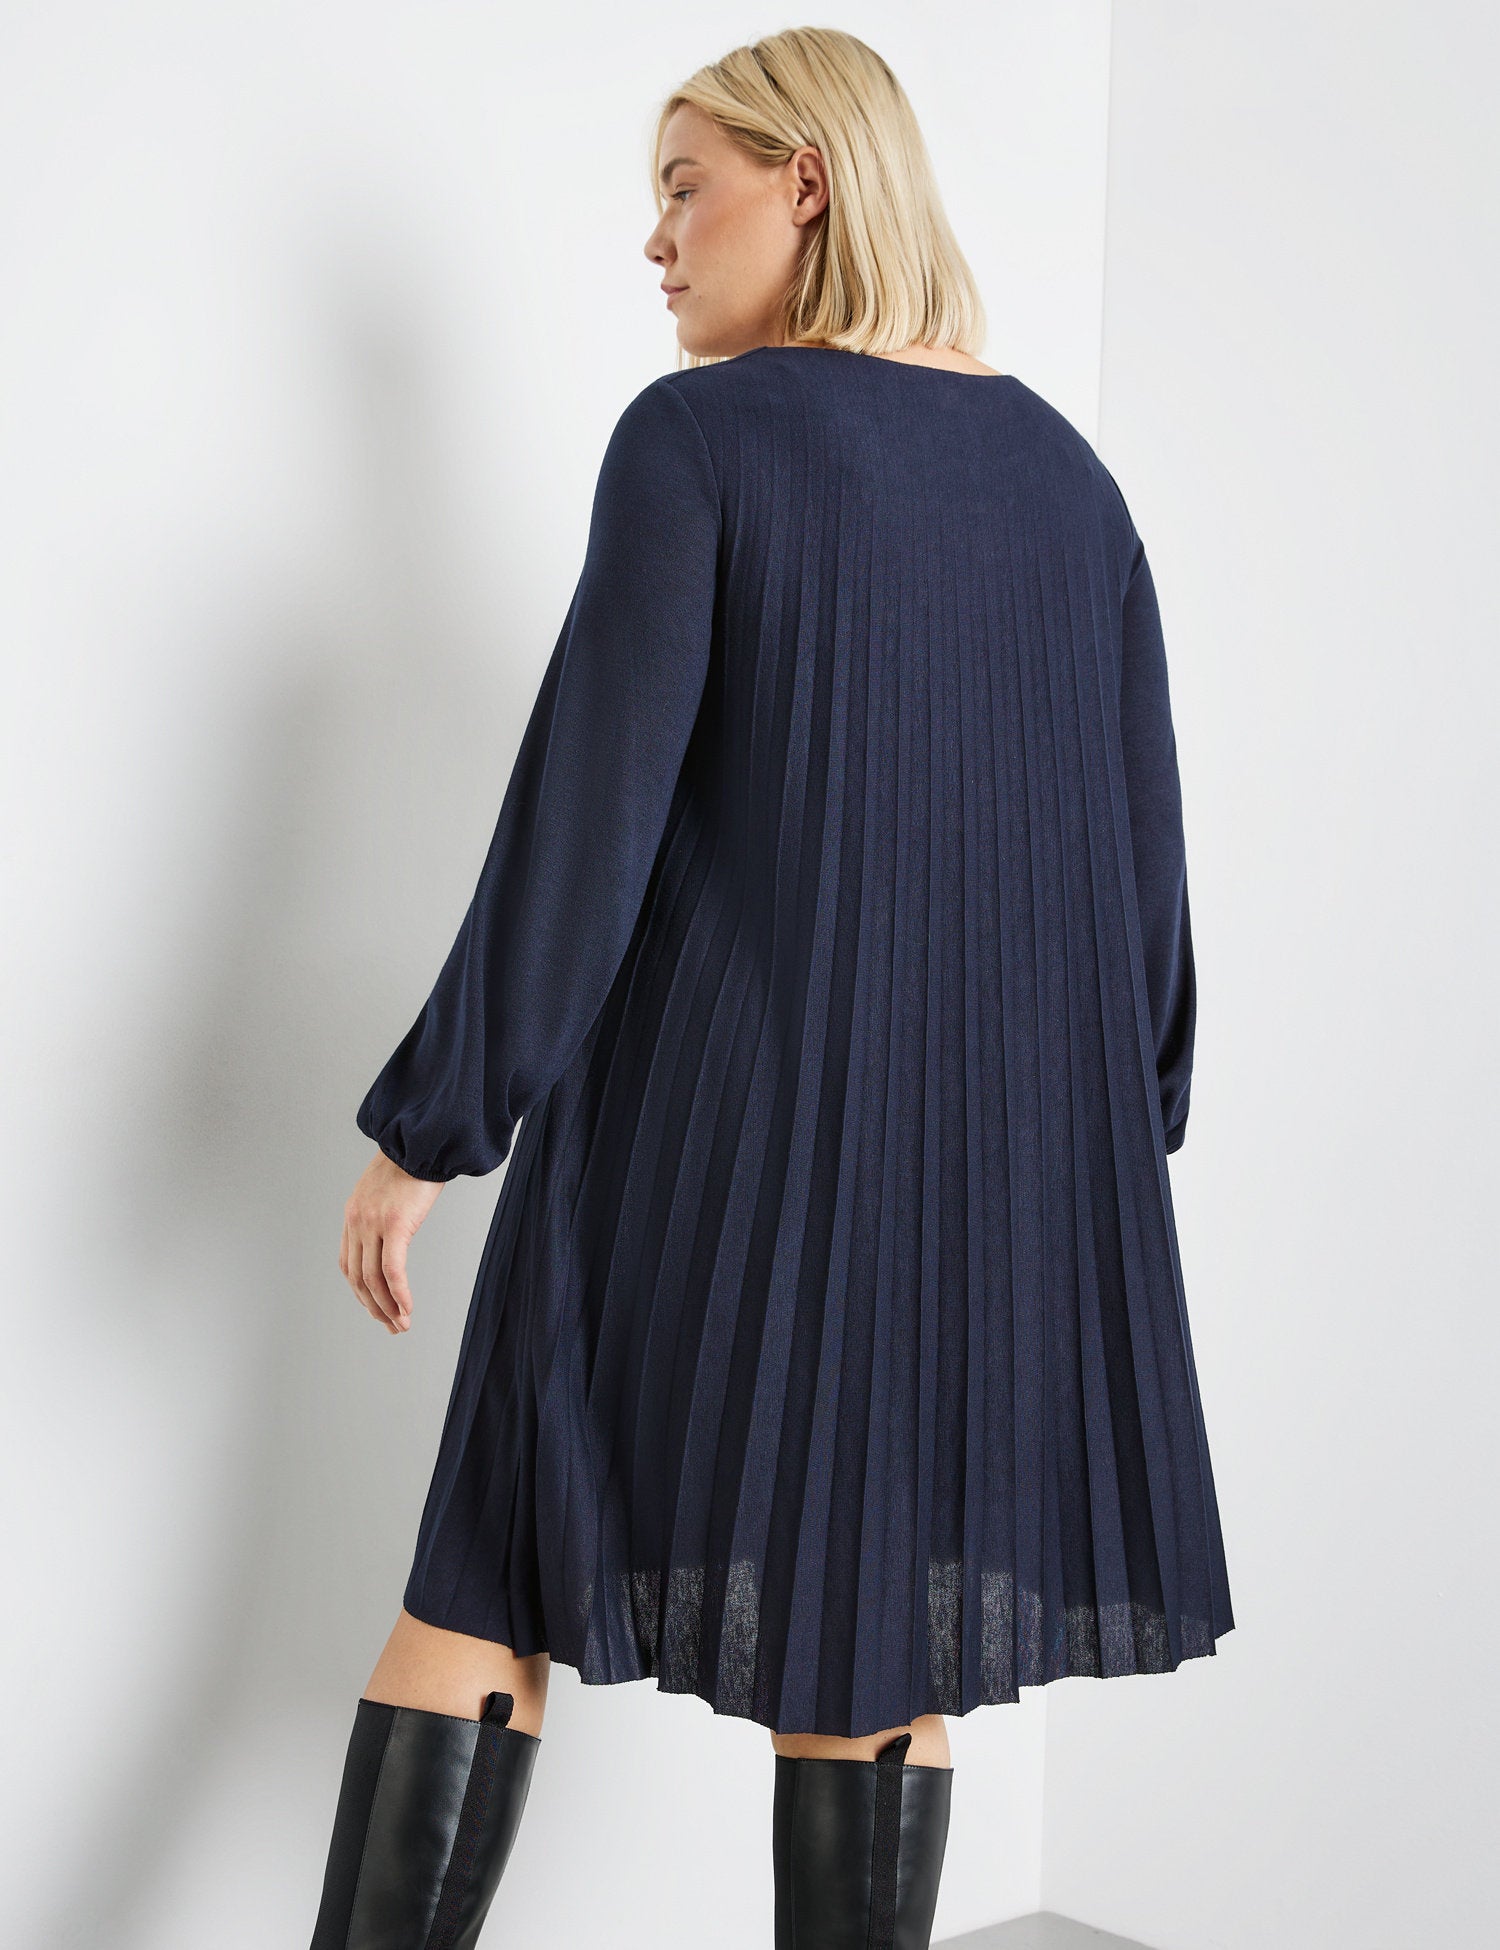 Pleated Skirt Made Of Soft Jersey_381211-26418_8450_06